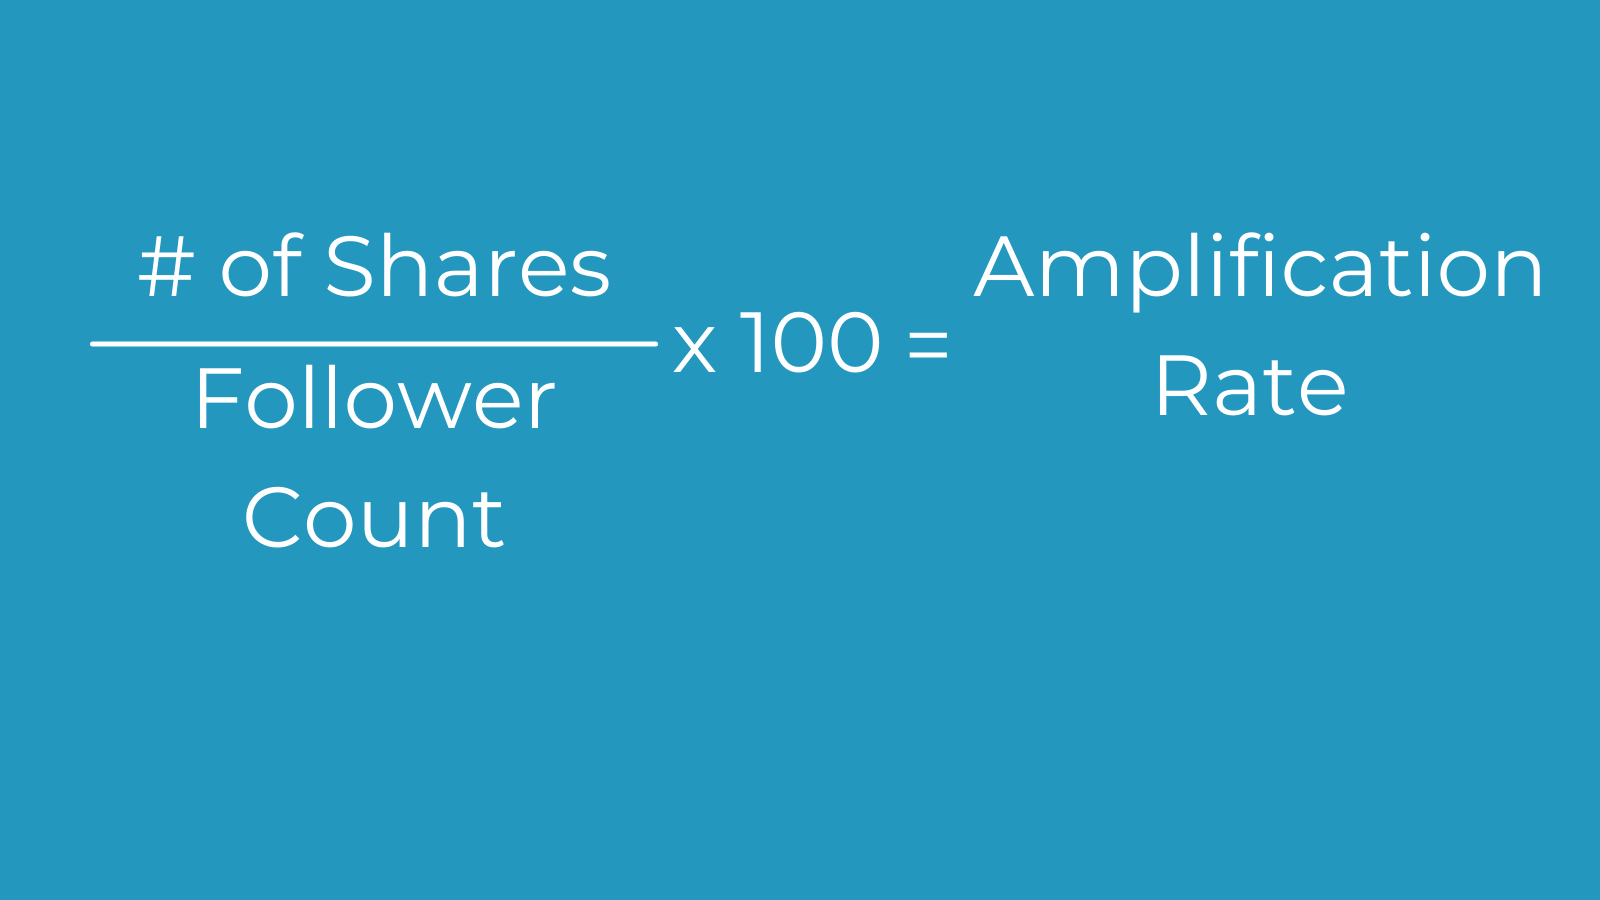 An infographic that reads "number of shares divided by follower count times 100 = amplification rate."